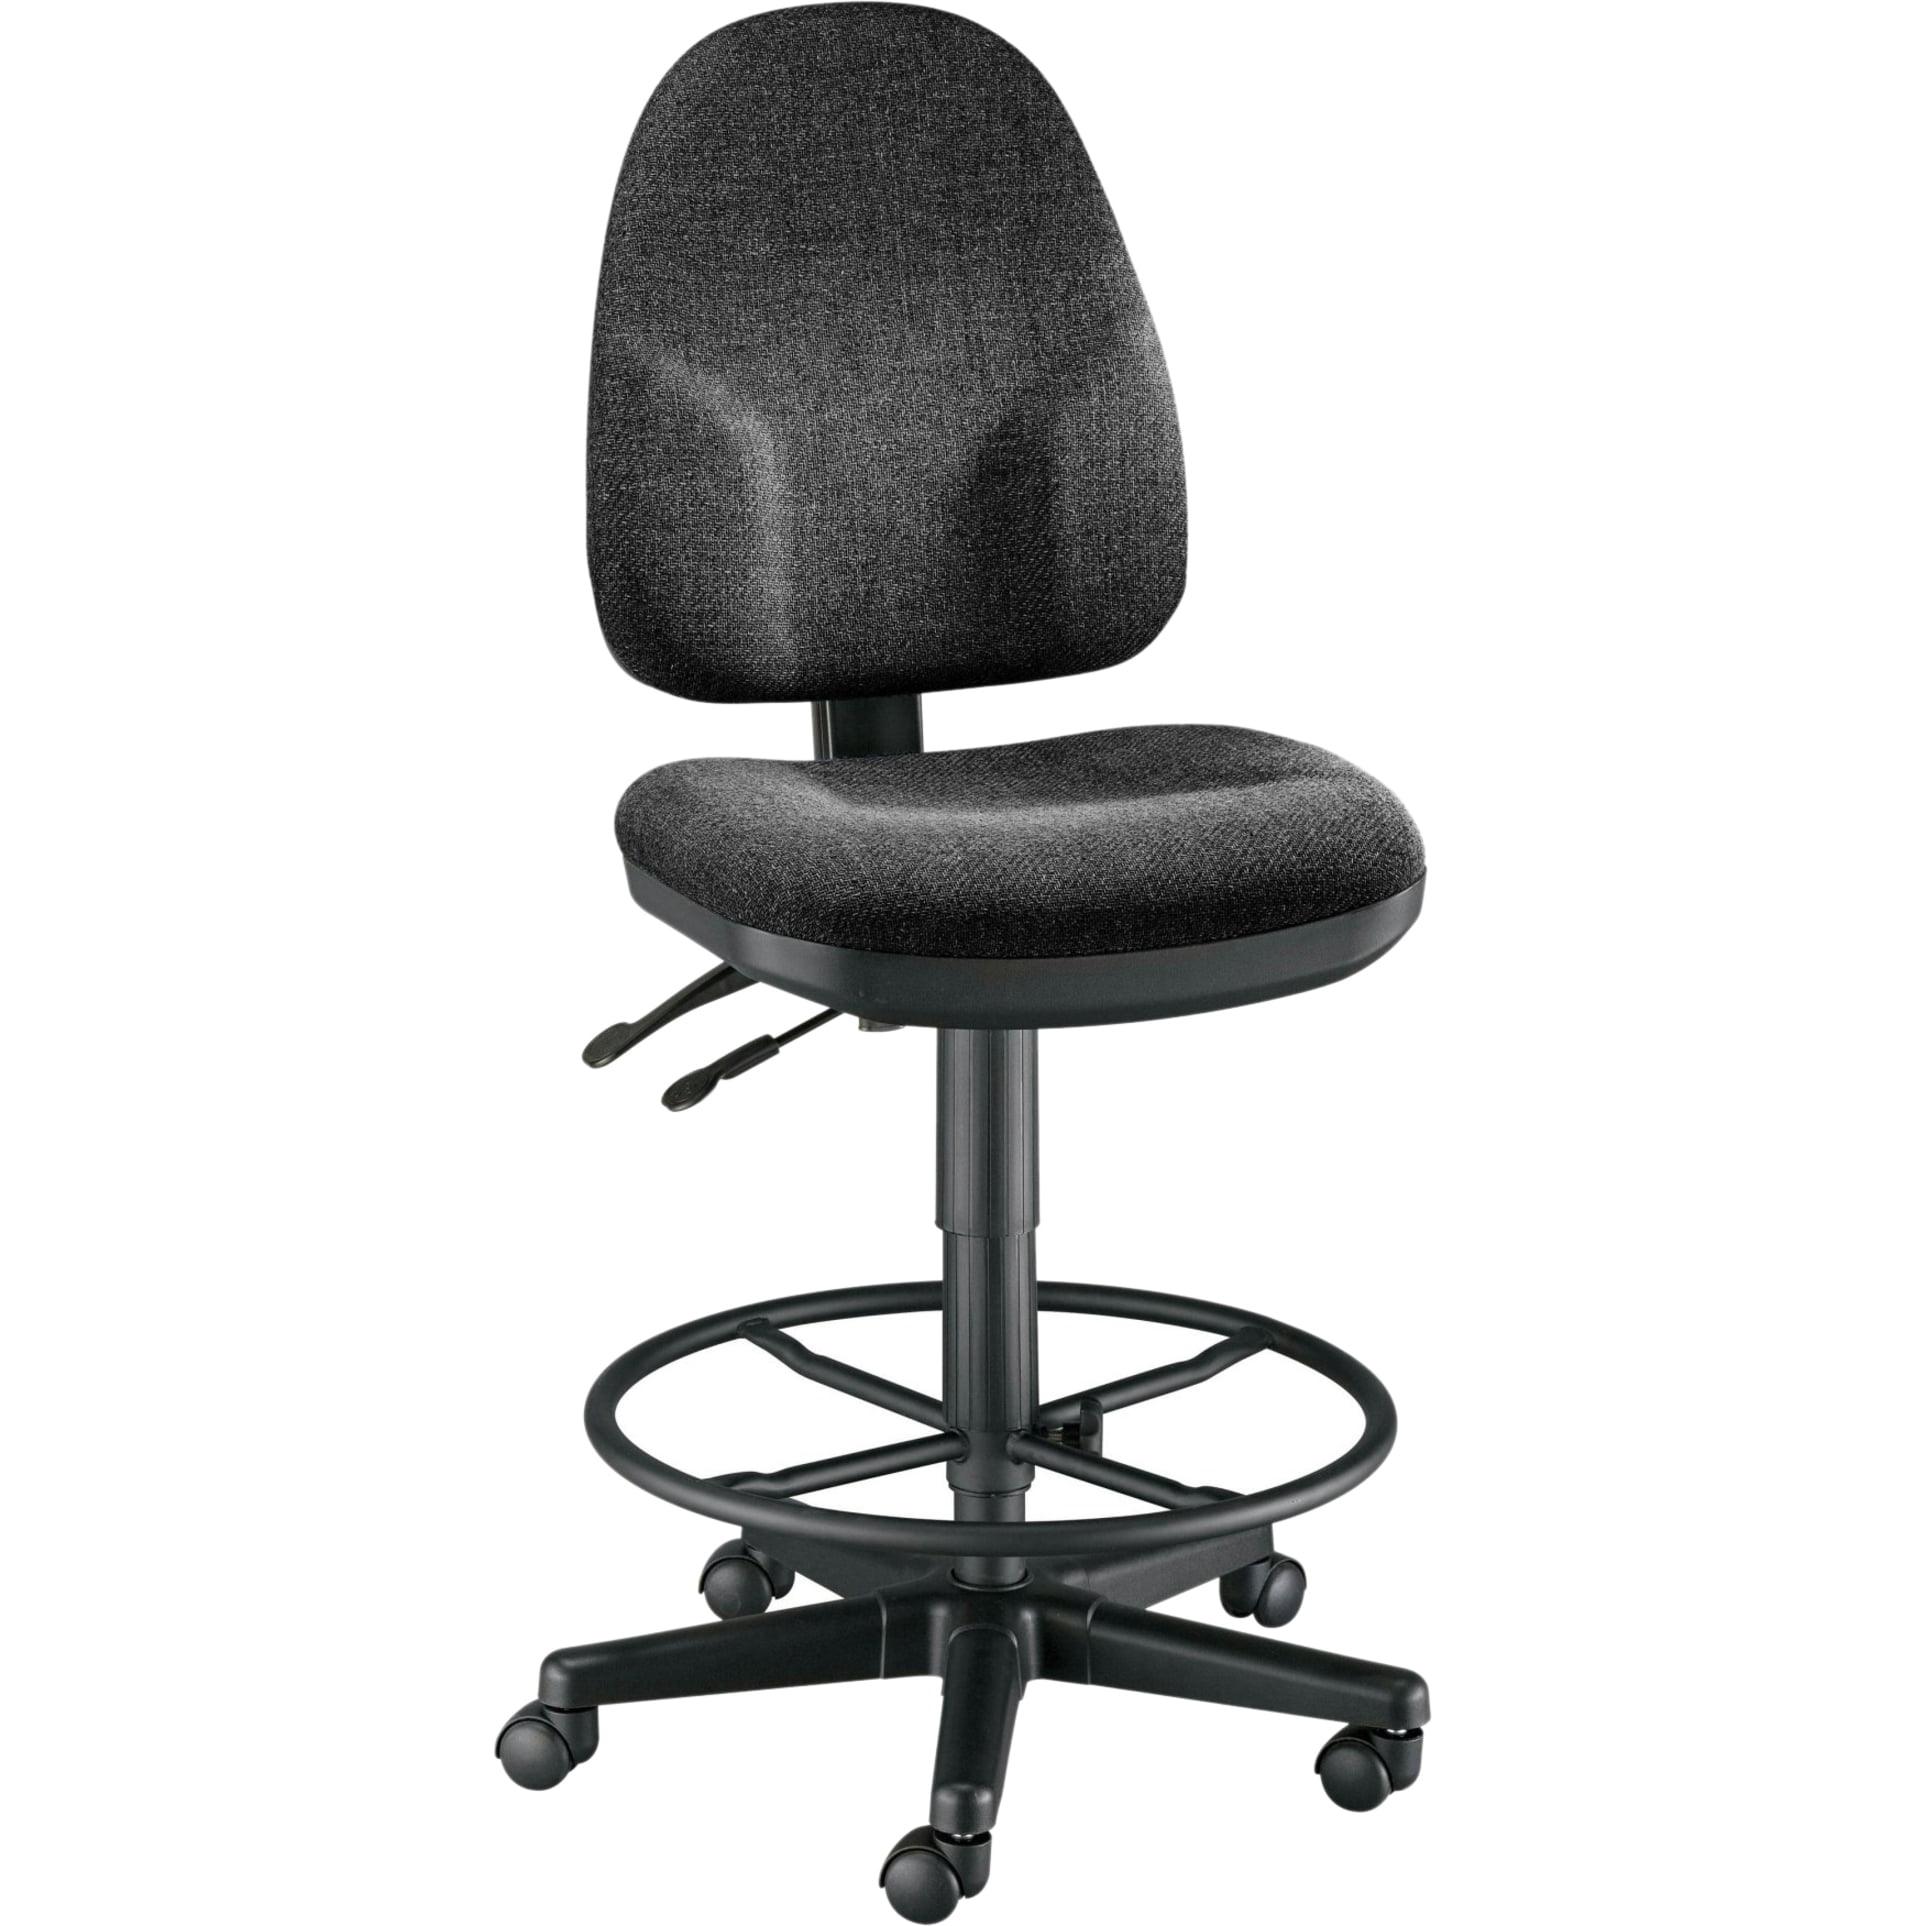 NEW Alvin Black High Back Office Monarch Drafting Height Chair with Footstep 